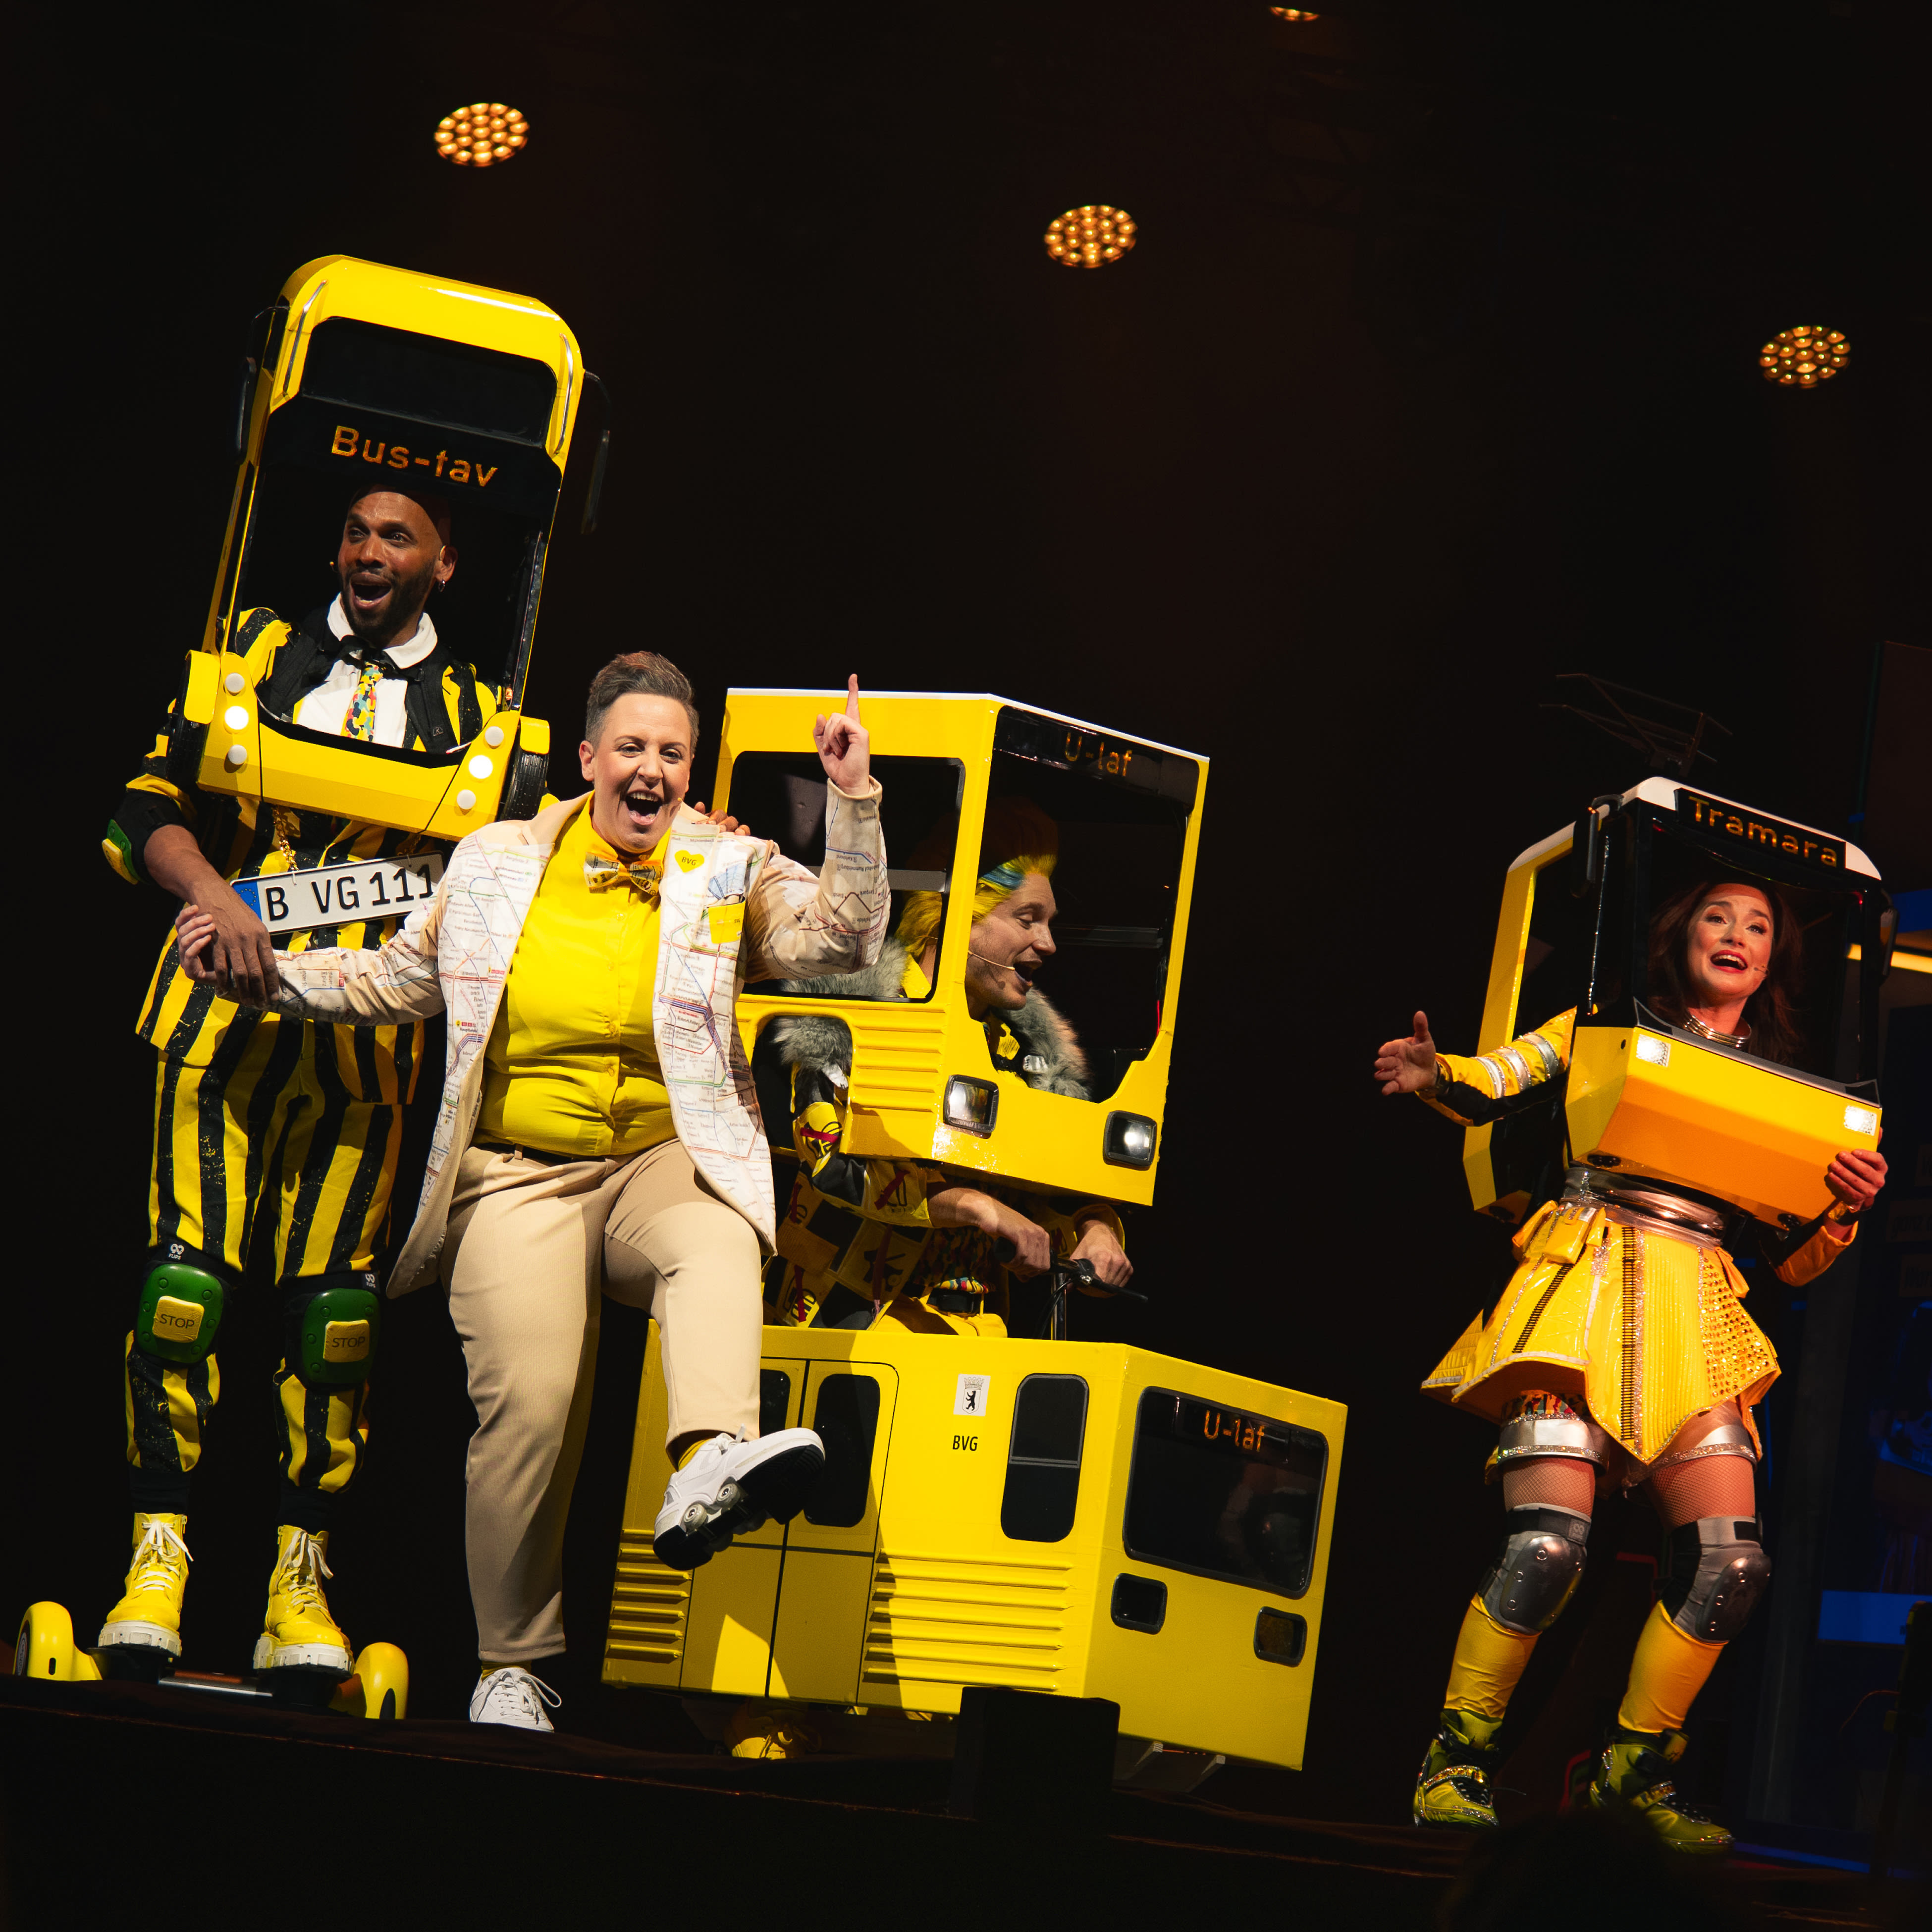  Performers on stage in vibrant costumes with theatrical props, depicting a scene involving a yellow bus and a phone booth, with dynamic lighting effects enhancing the ambience of the performance.